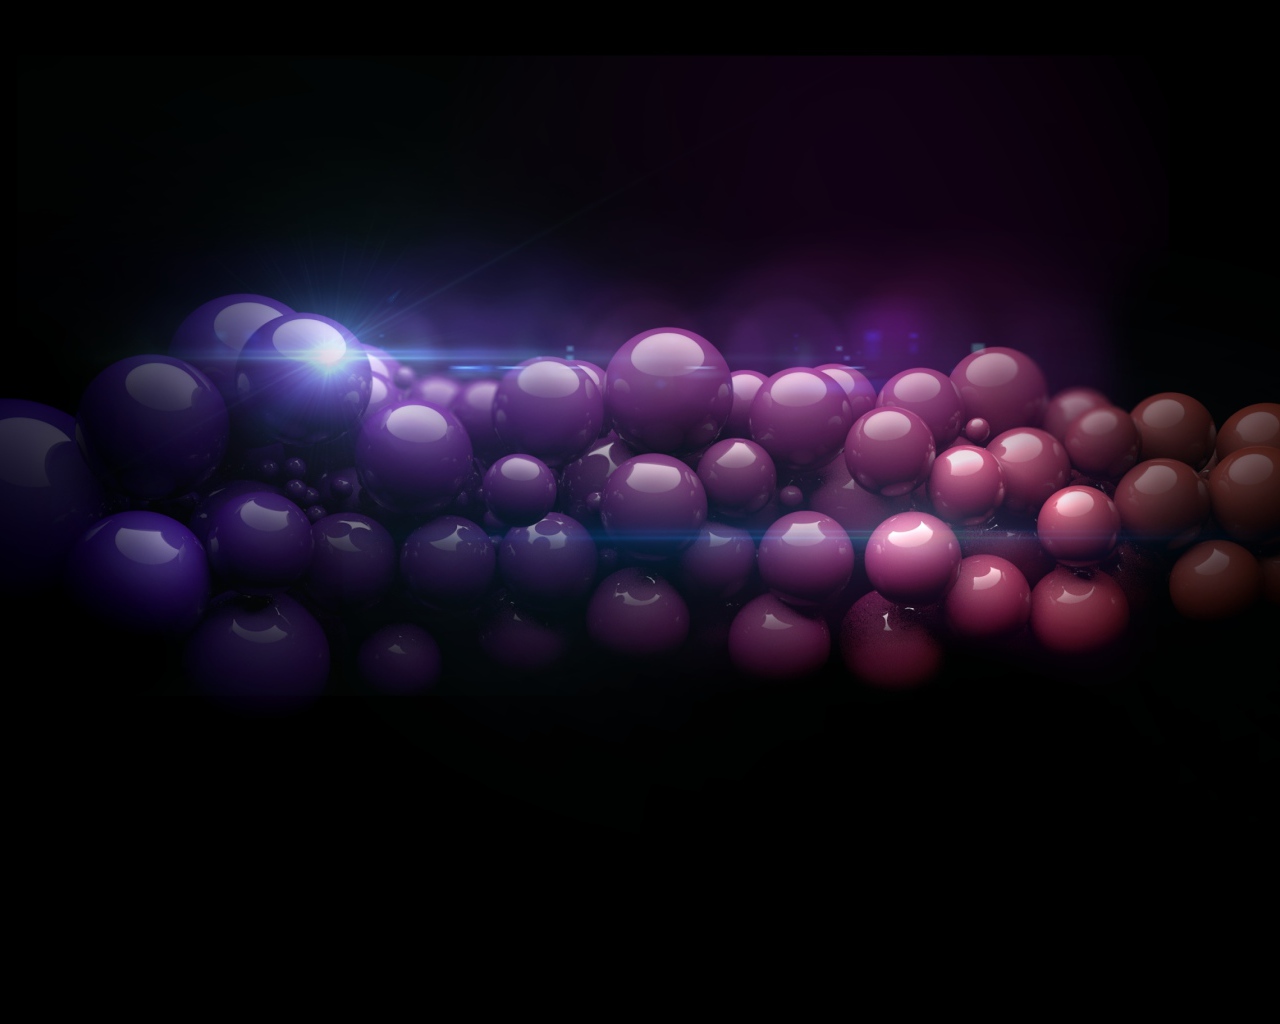 A thread of colorful balls on a black background